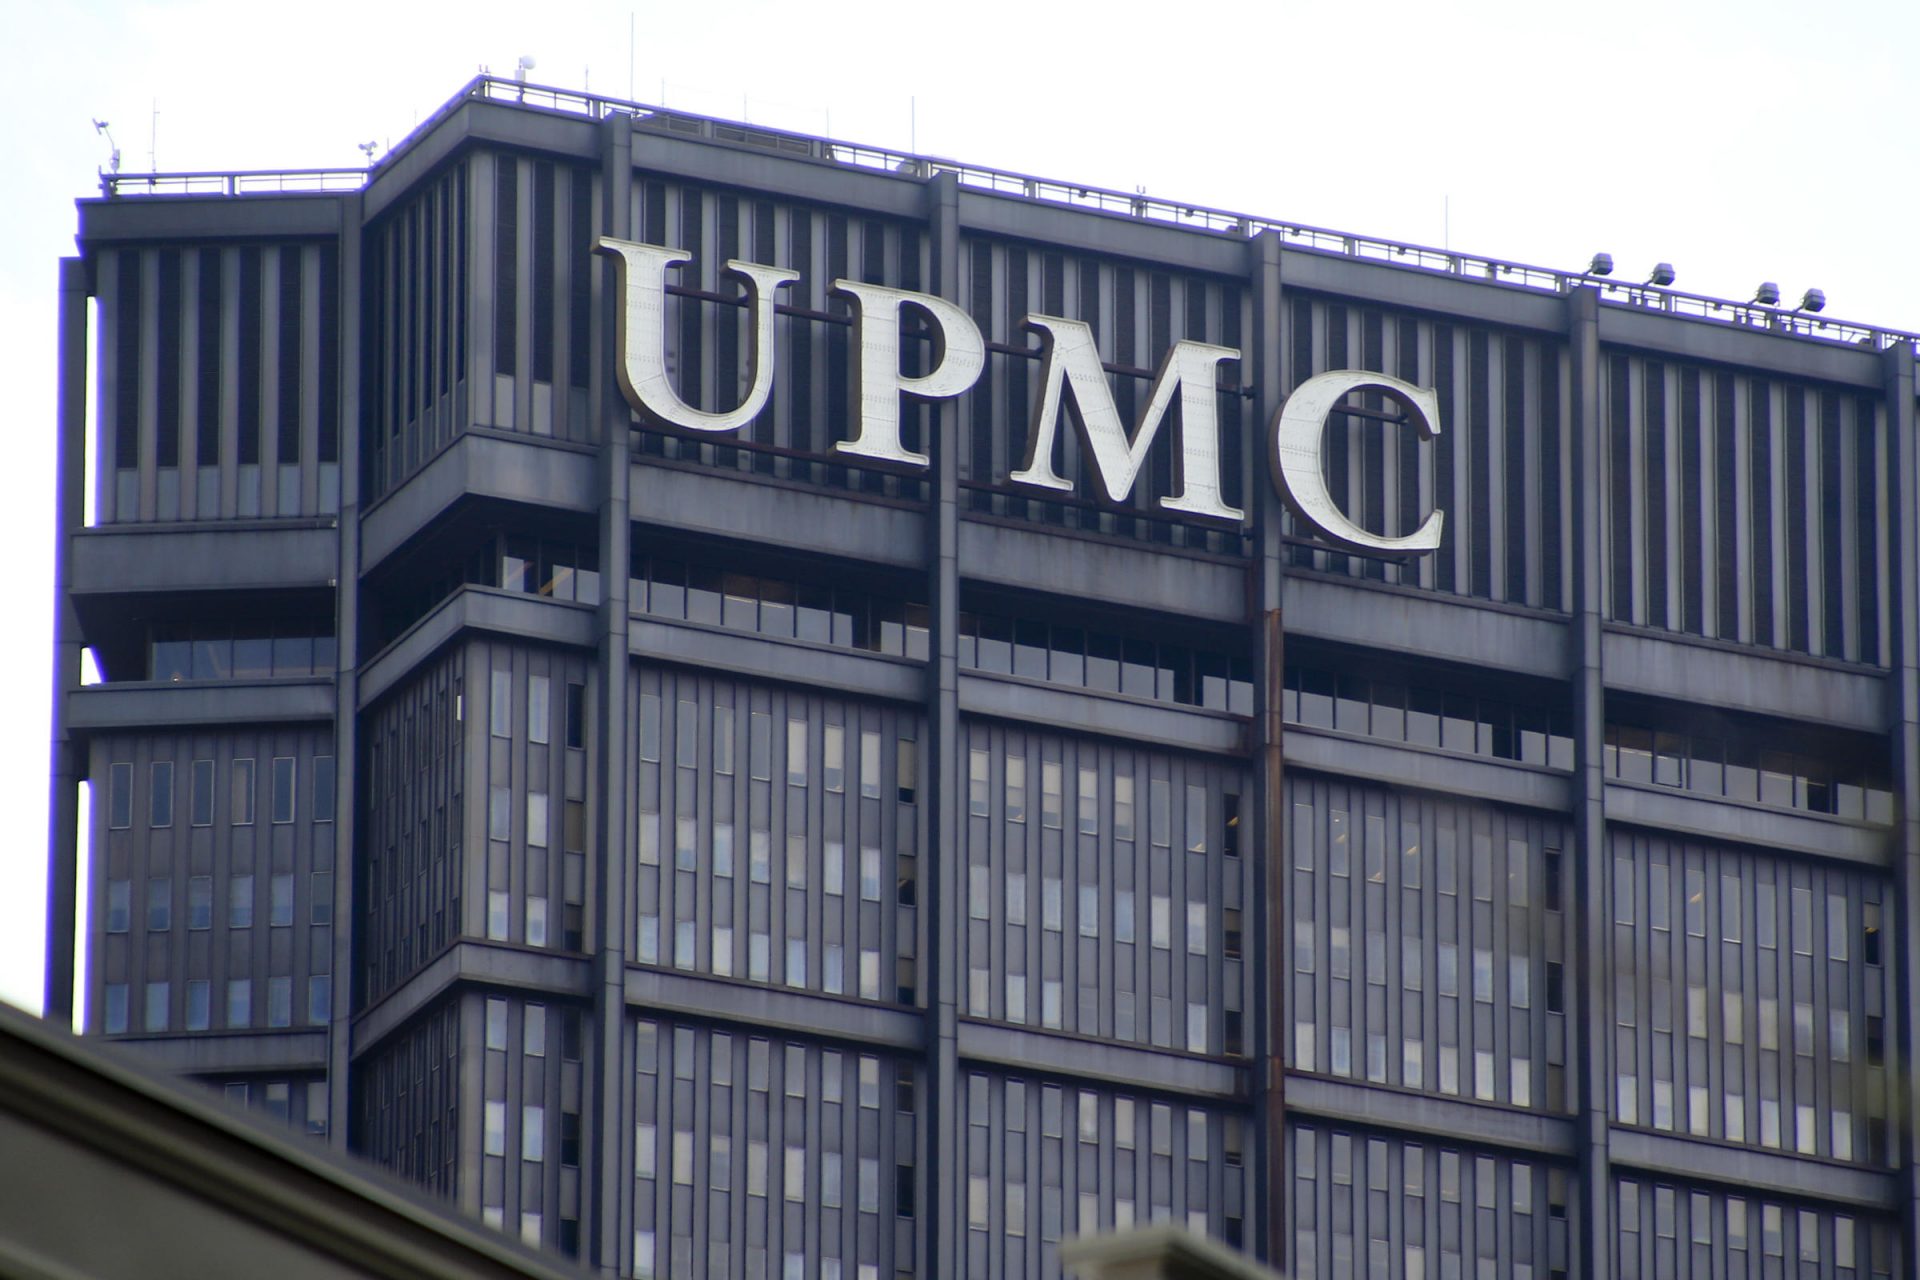 The signs marking the offices for the University of Pittsburgh Medical Center, UPMC, are seen on top of the U.S. Steel tower on Monday, April 3, 2017, in Pittsburgh.